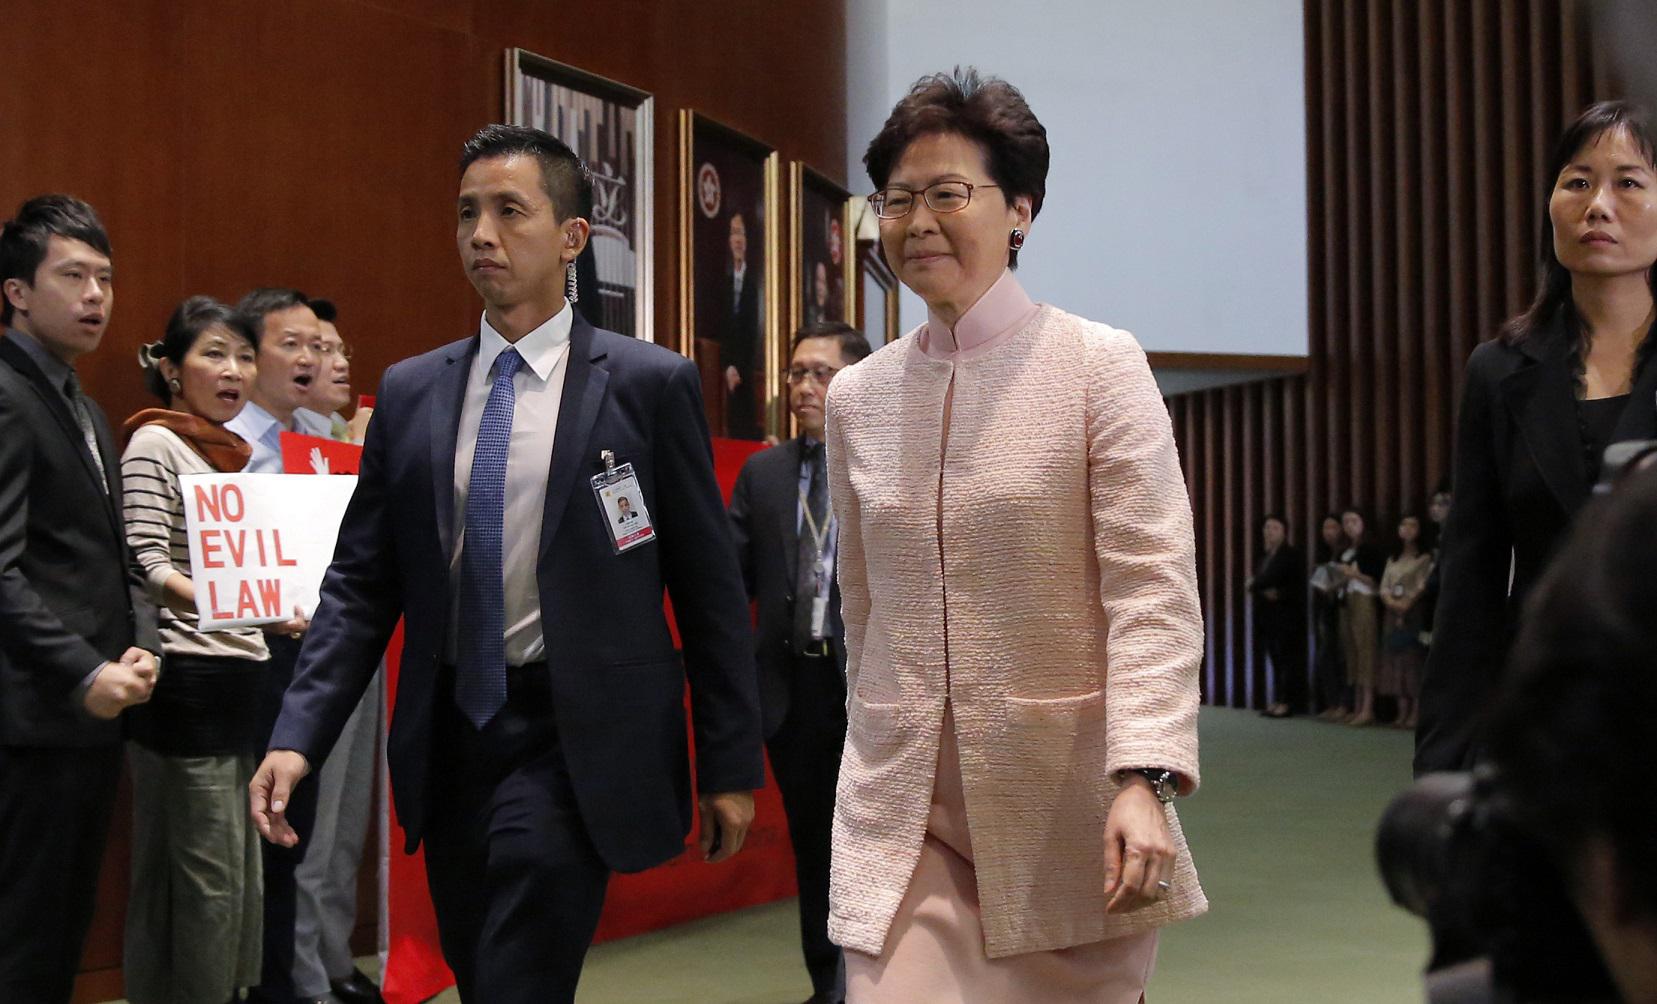 FILE - In this May 22, 2019, file photo, Hong Kong Chief Executive Carrie Lam, center, arrives for a meeting at the Legislative Council as the pro-democracy lawmakers chant placard and banner against the new extradition law in Hong Kong. Hong Kong's gover